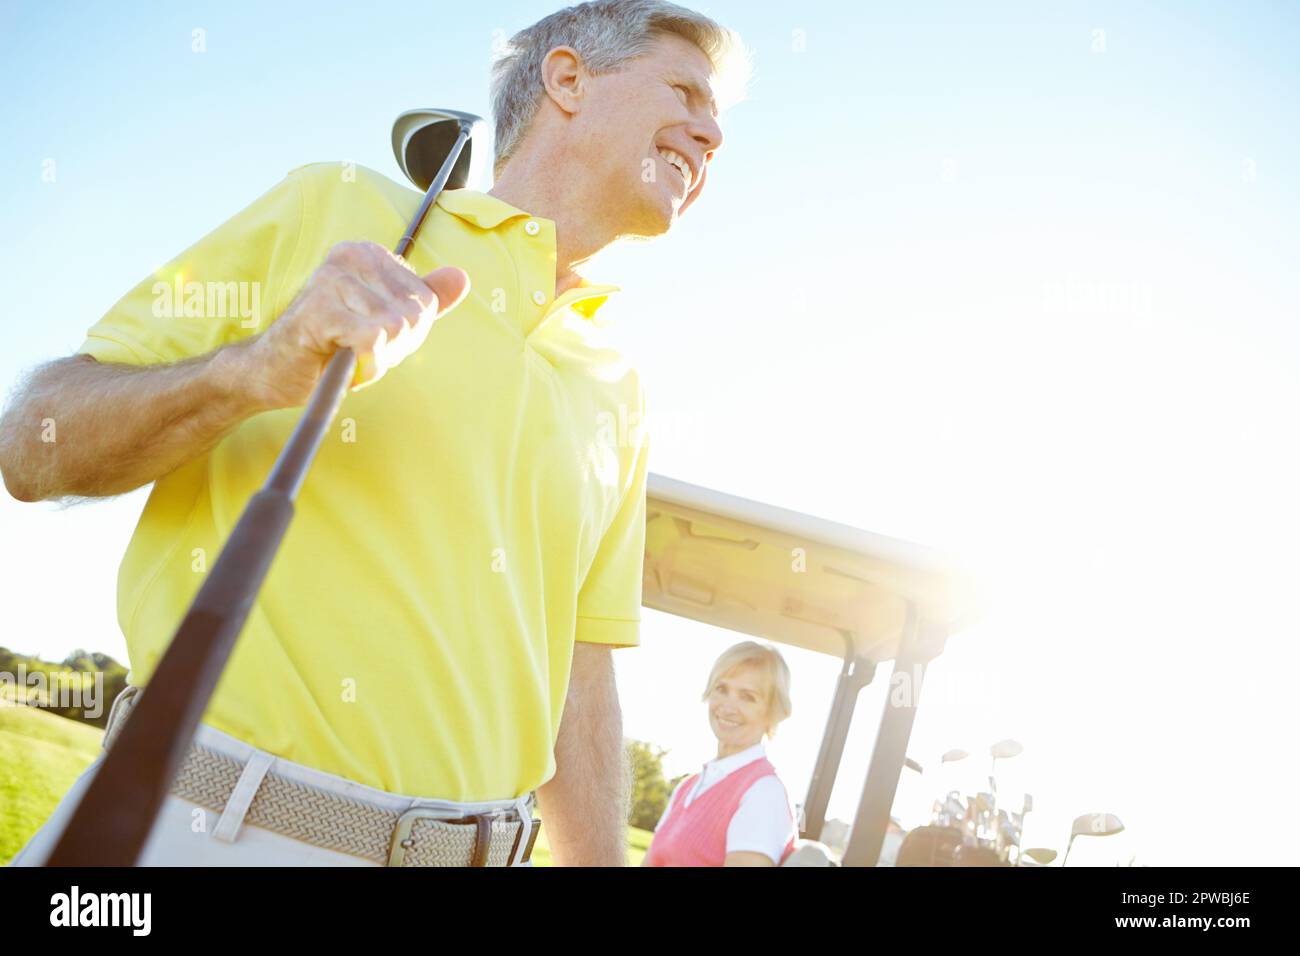 Golfing is the perfect pastime. Low angle shot of a handsome older golfer standing in front of a golf cart with his golfing buddy behind the wheel. Stock Photo